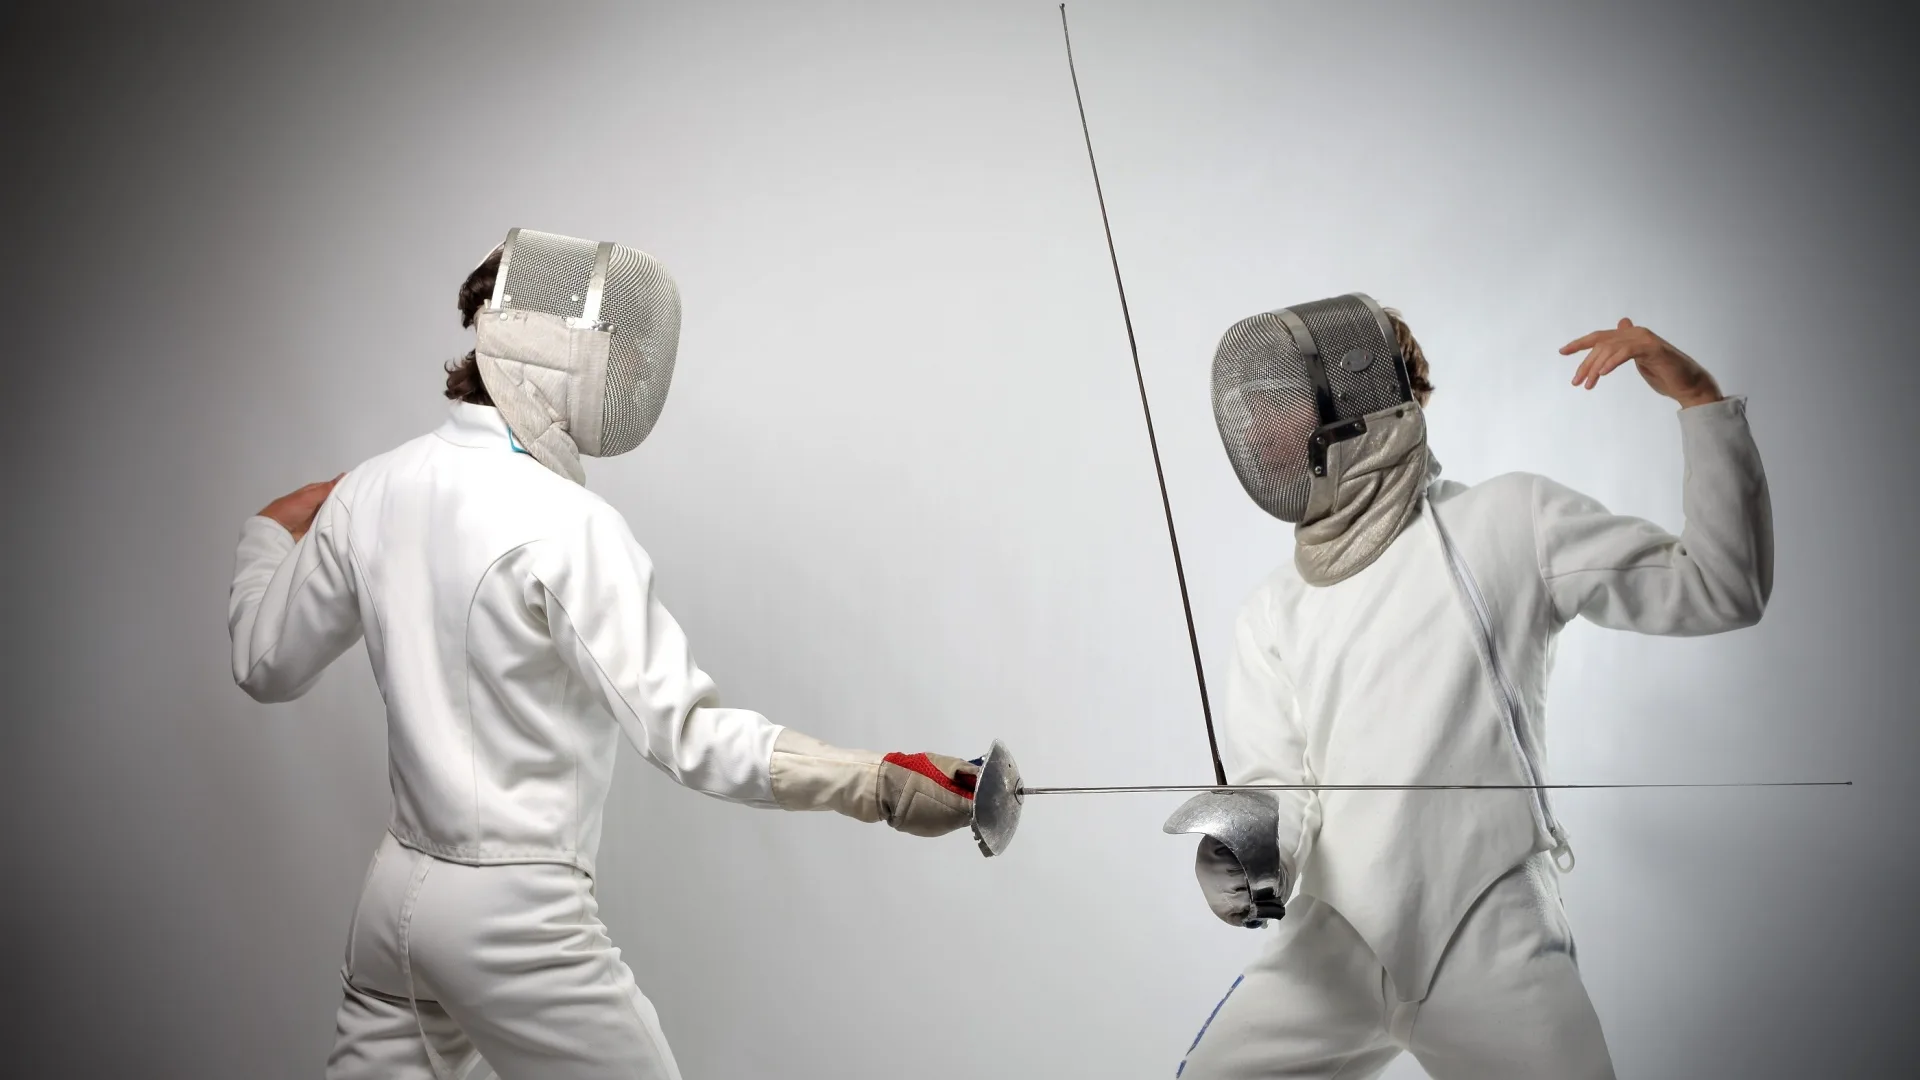 fencing_sports_white_background_79983_1920x1080